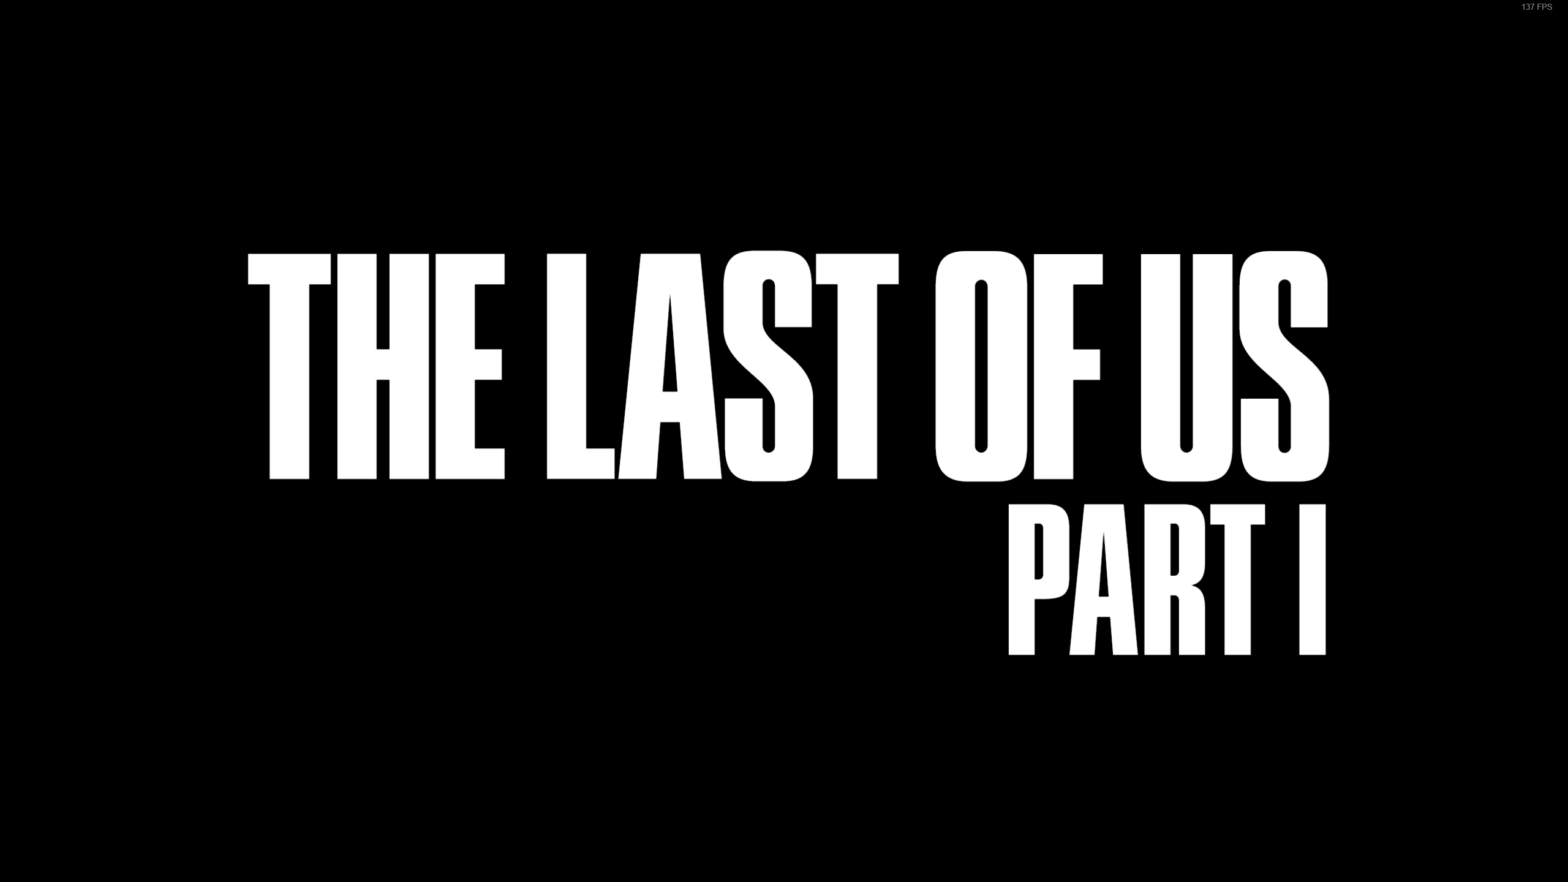 The Last of Us - Part 1 PC feature image